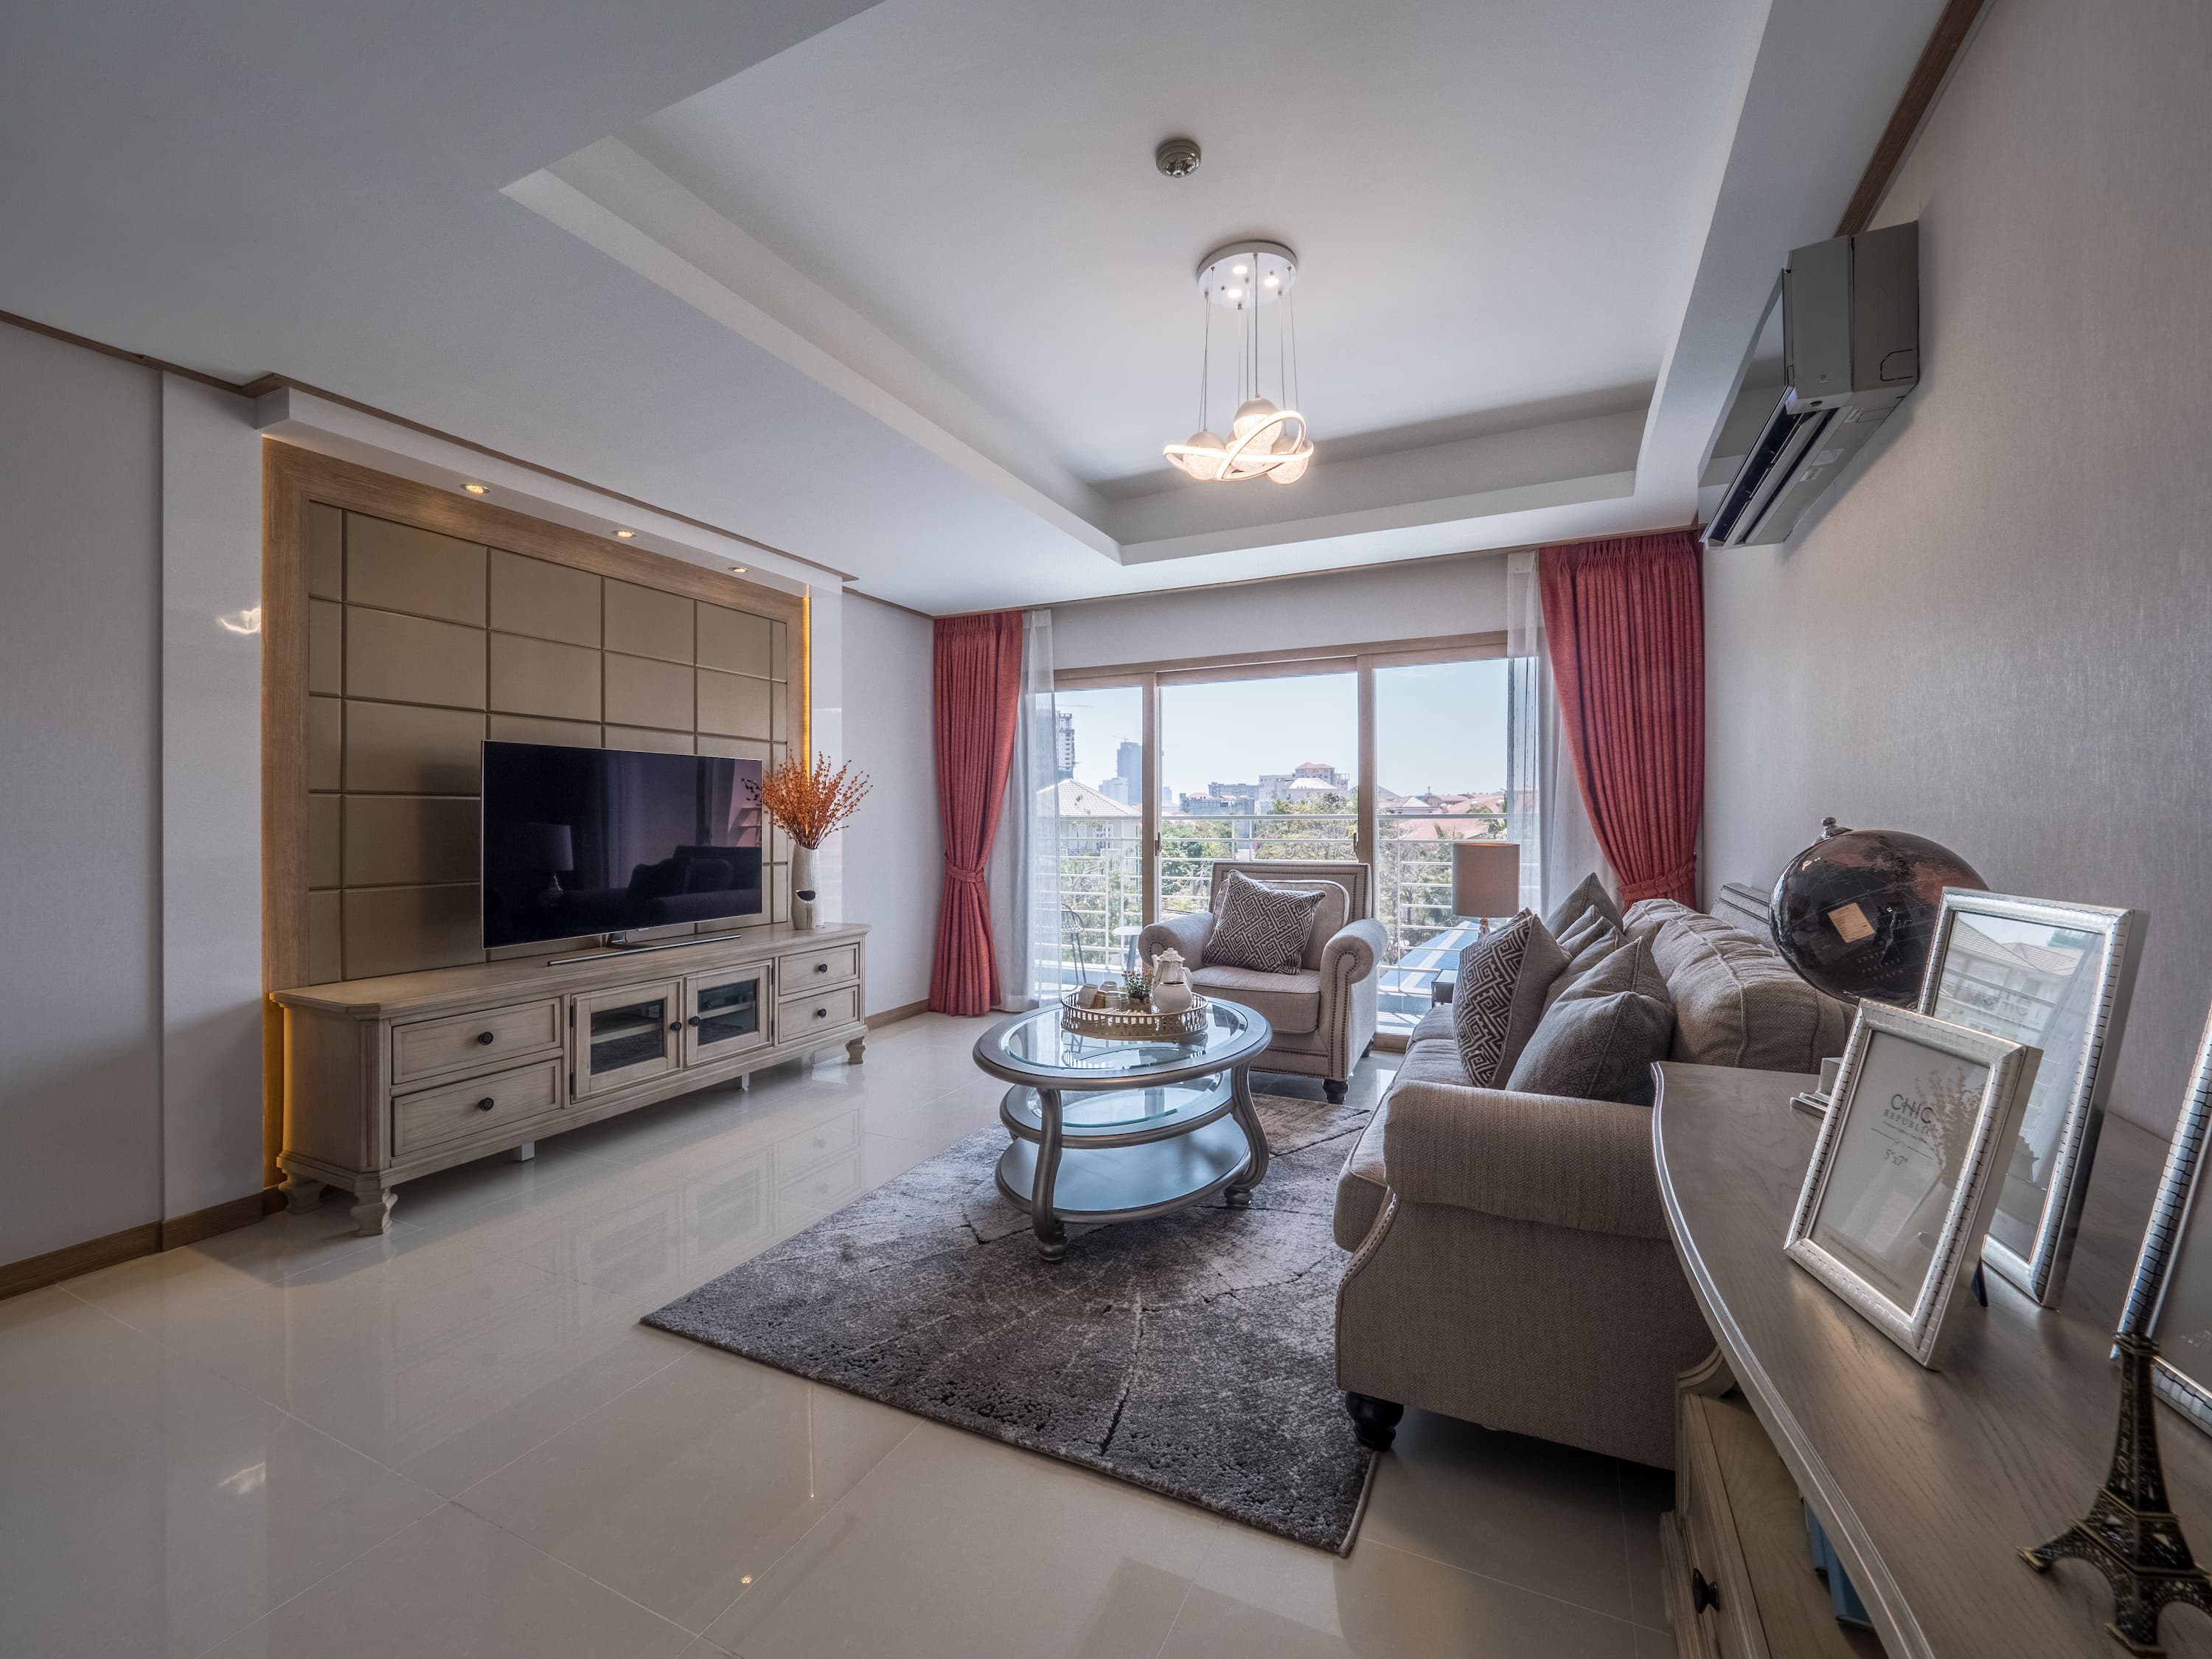 4 Things to Know Before Buying a Condo in Cambodia